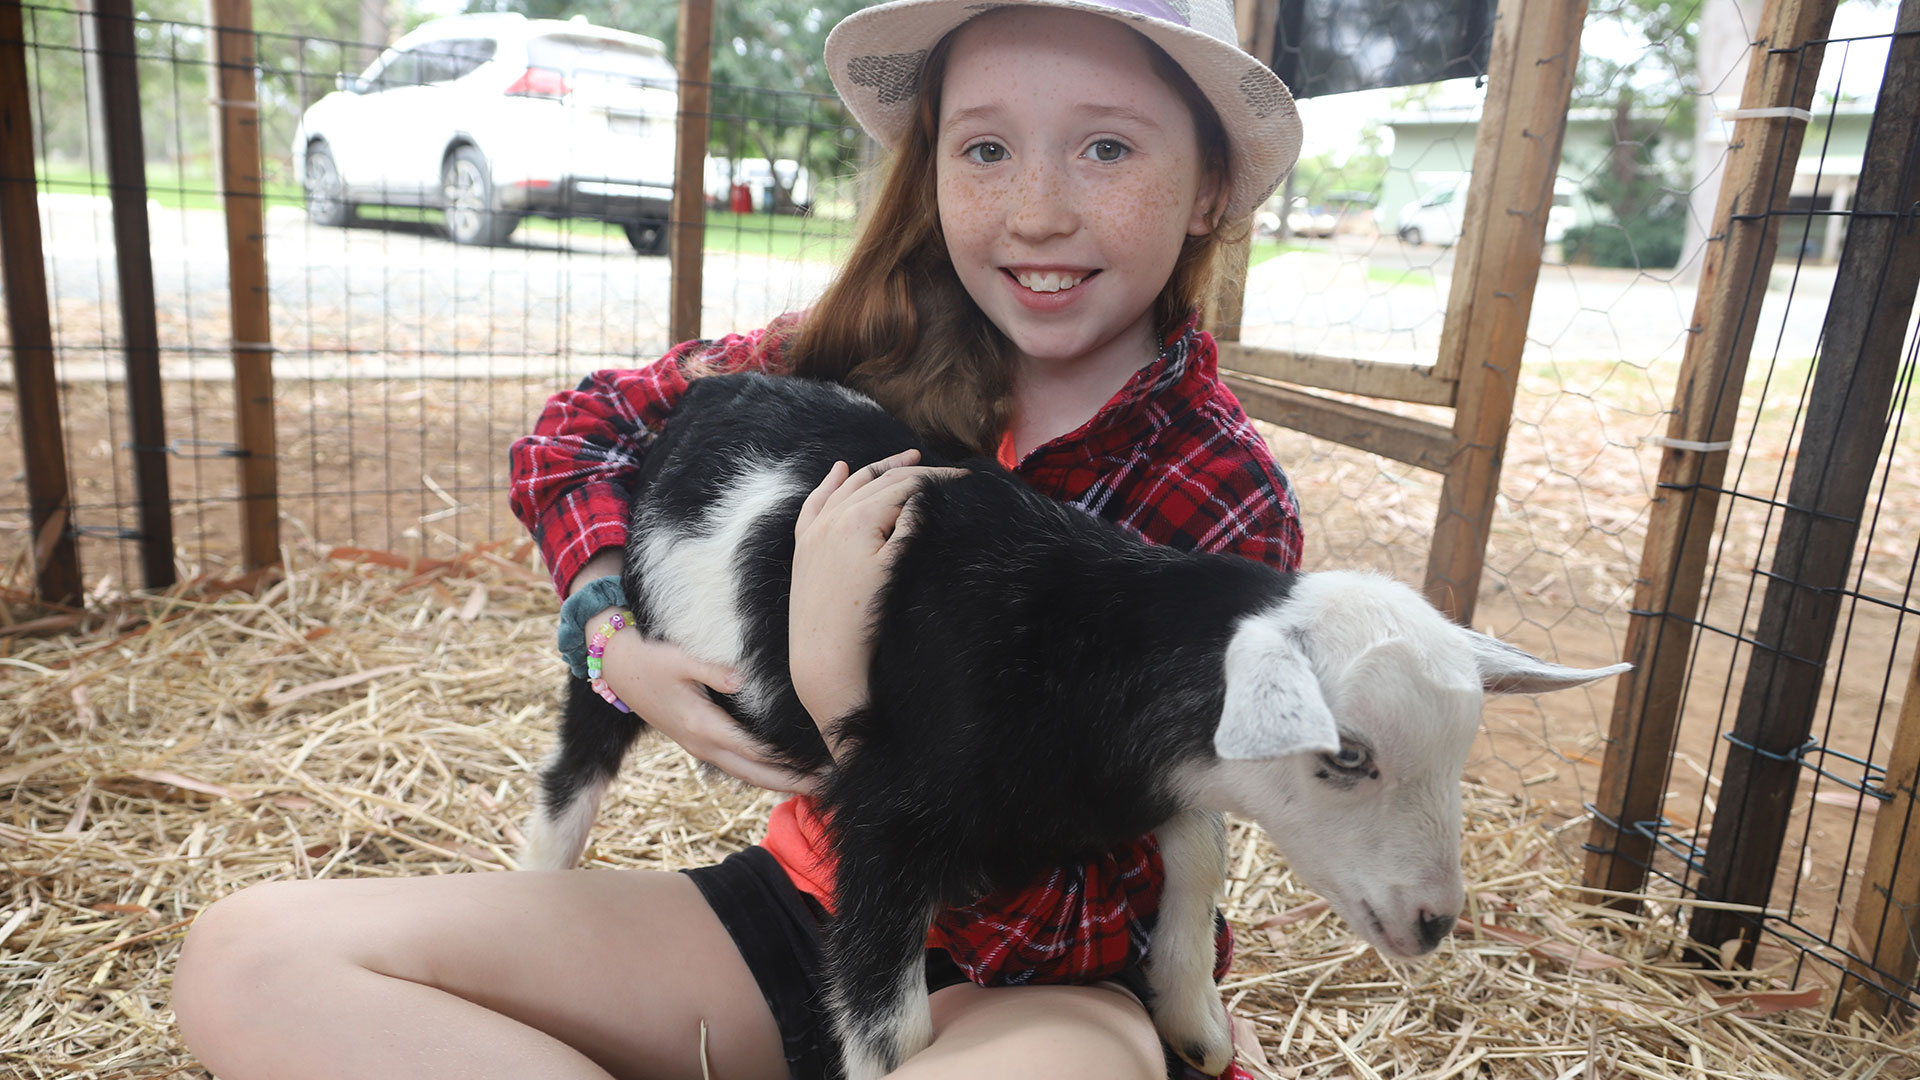 Young girl holding a baby goat